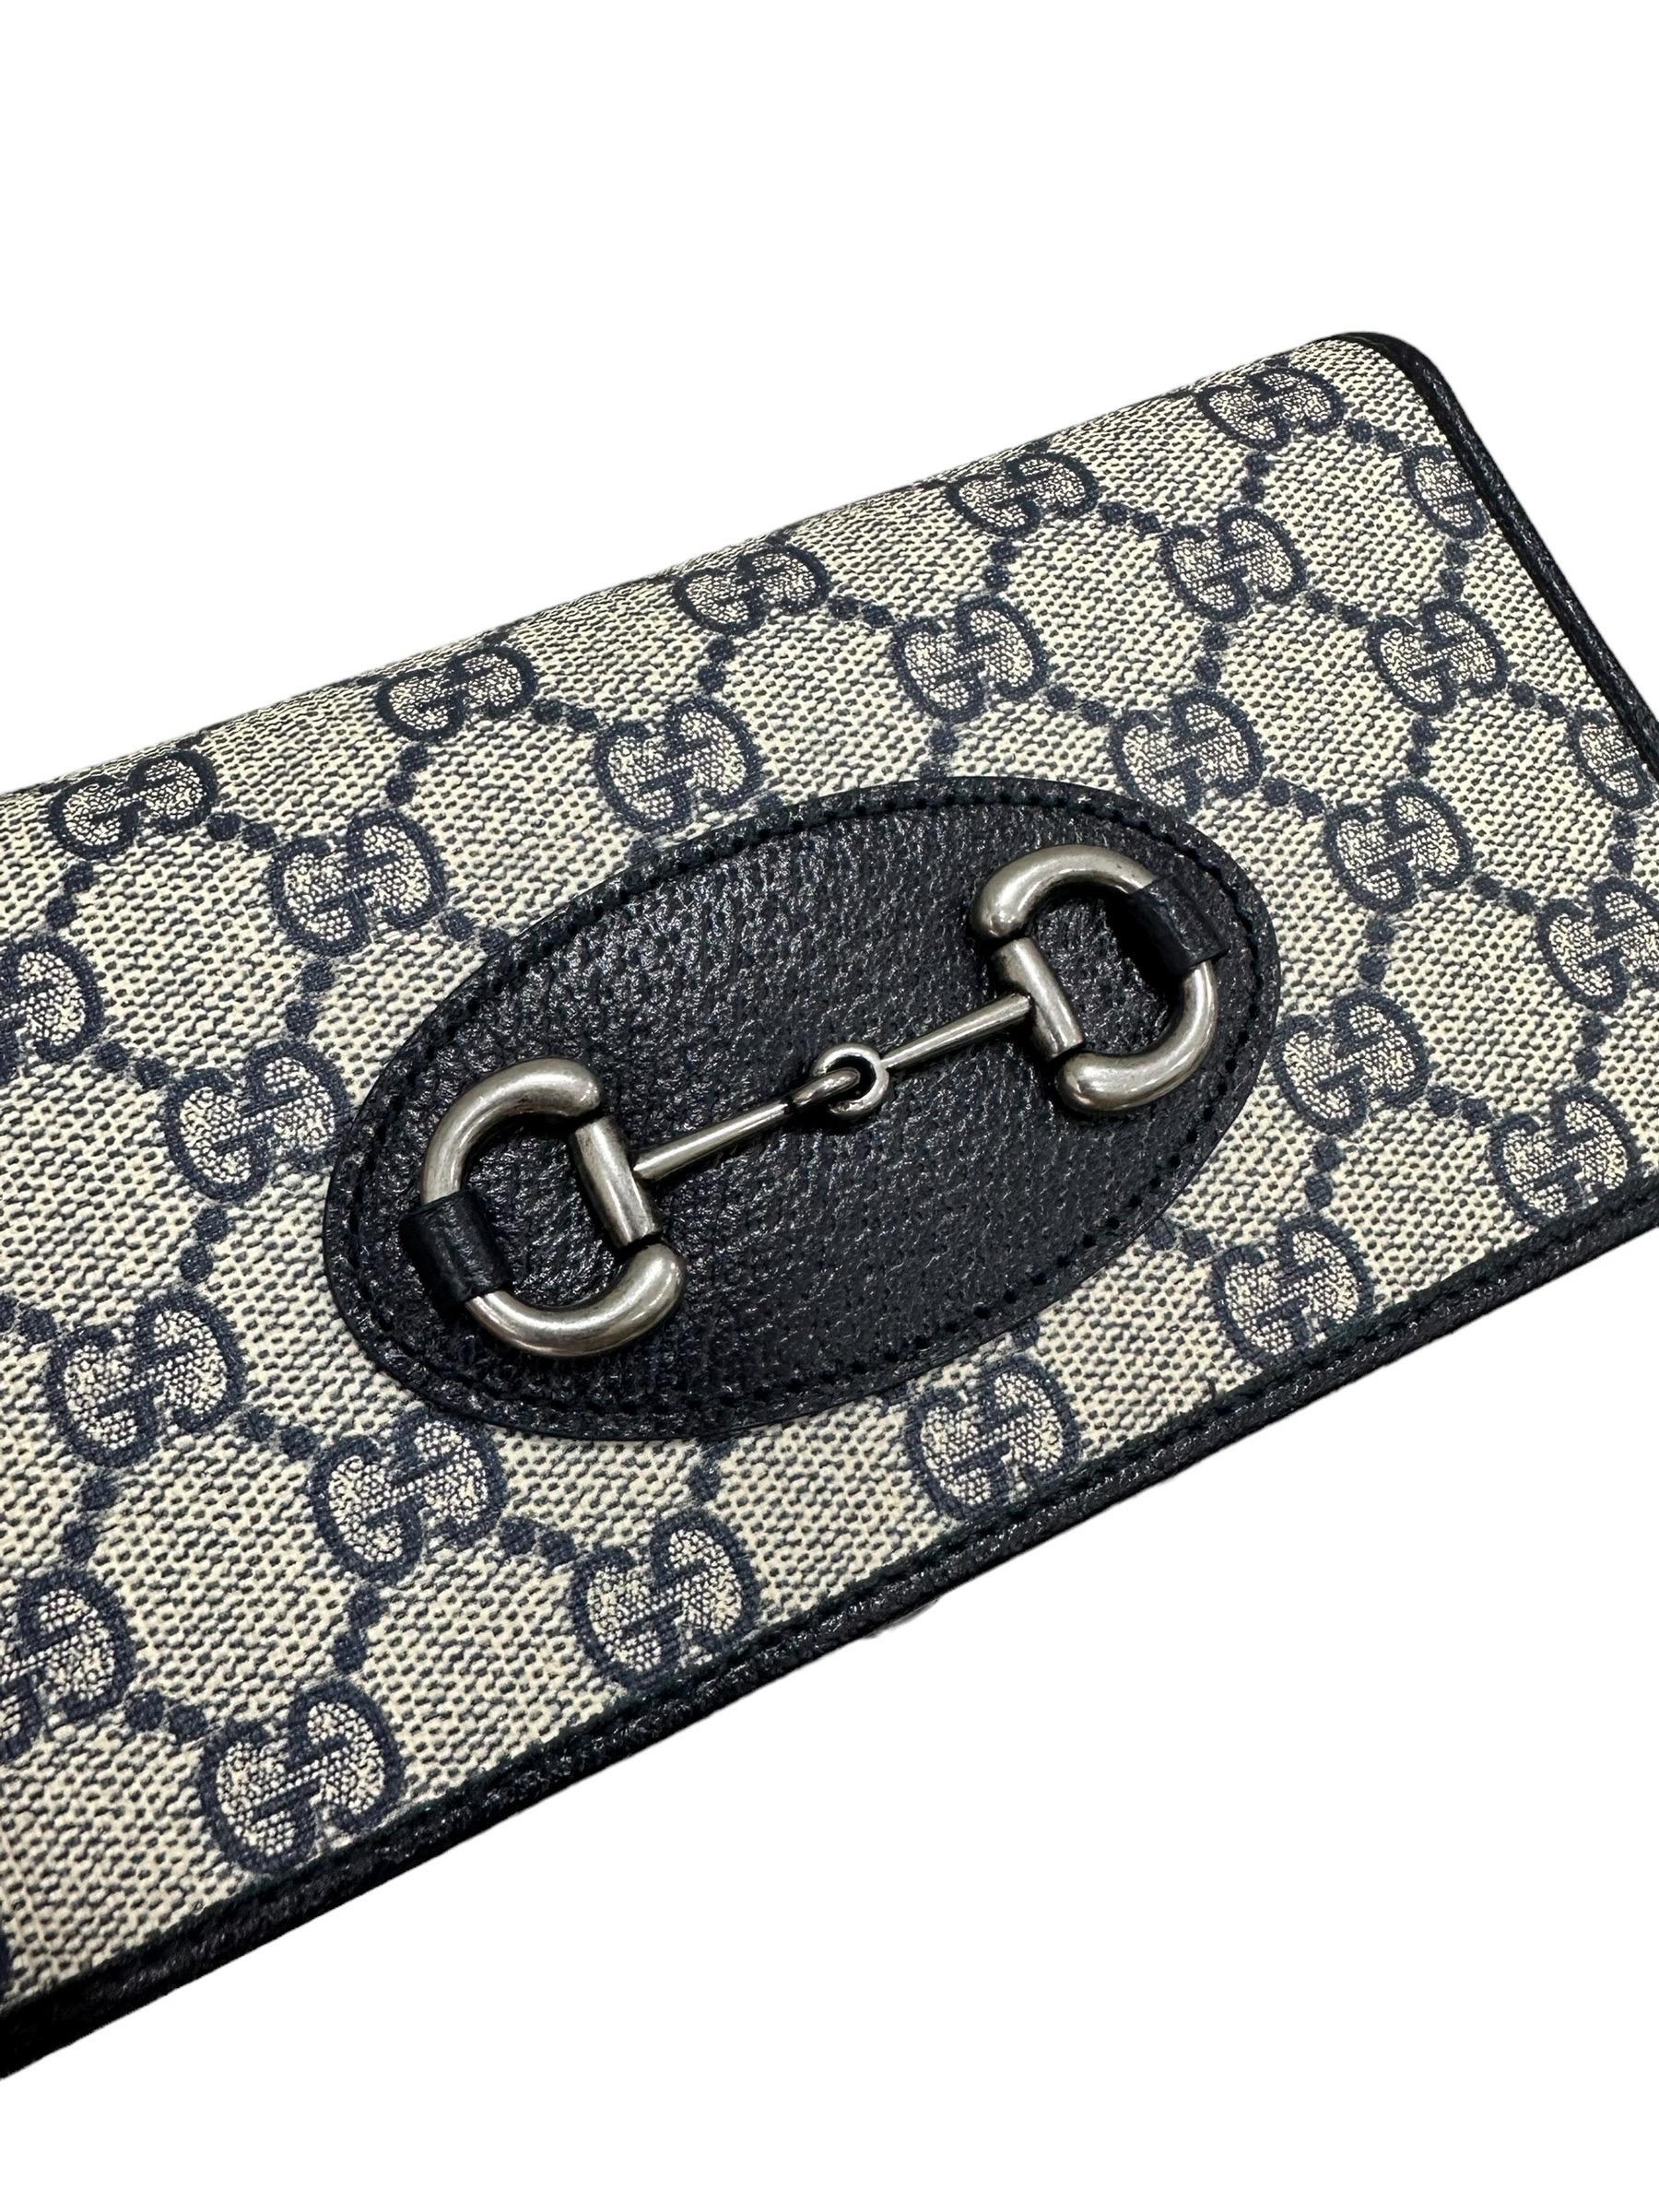 Gucci Horsebit GG Wallet On Chain For Sale 12